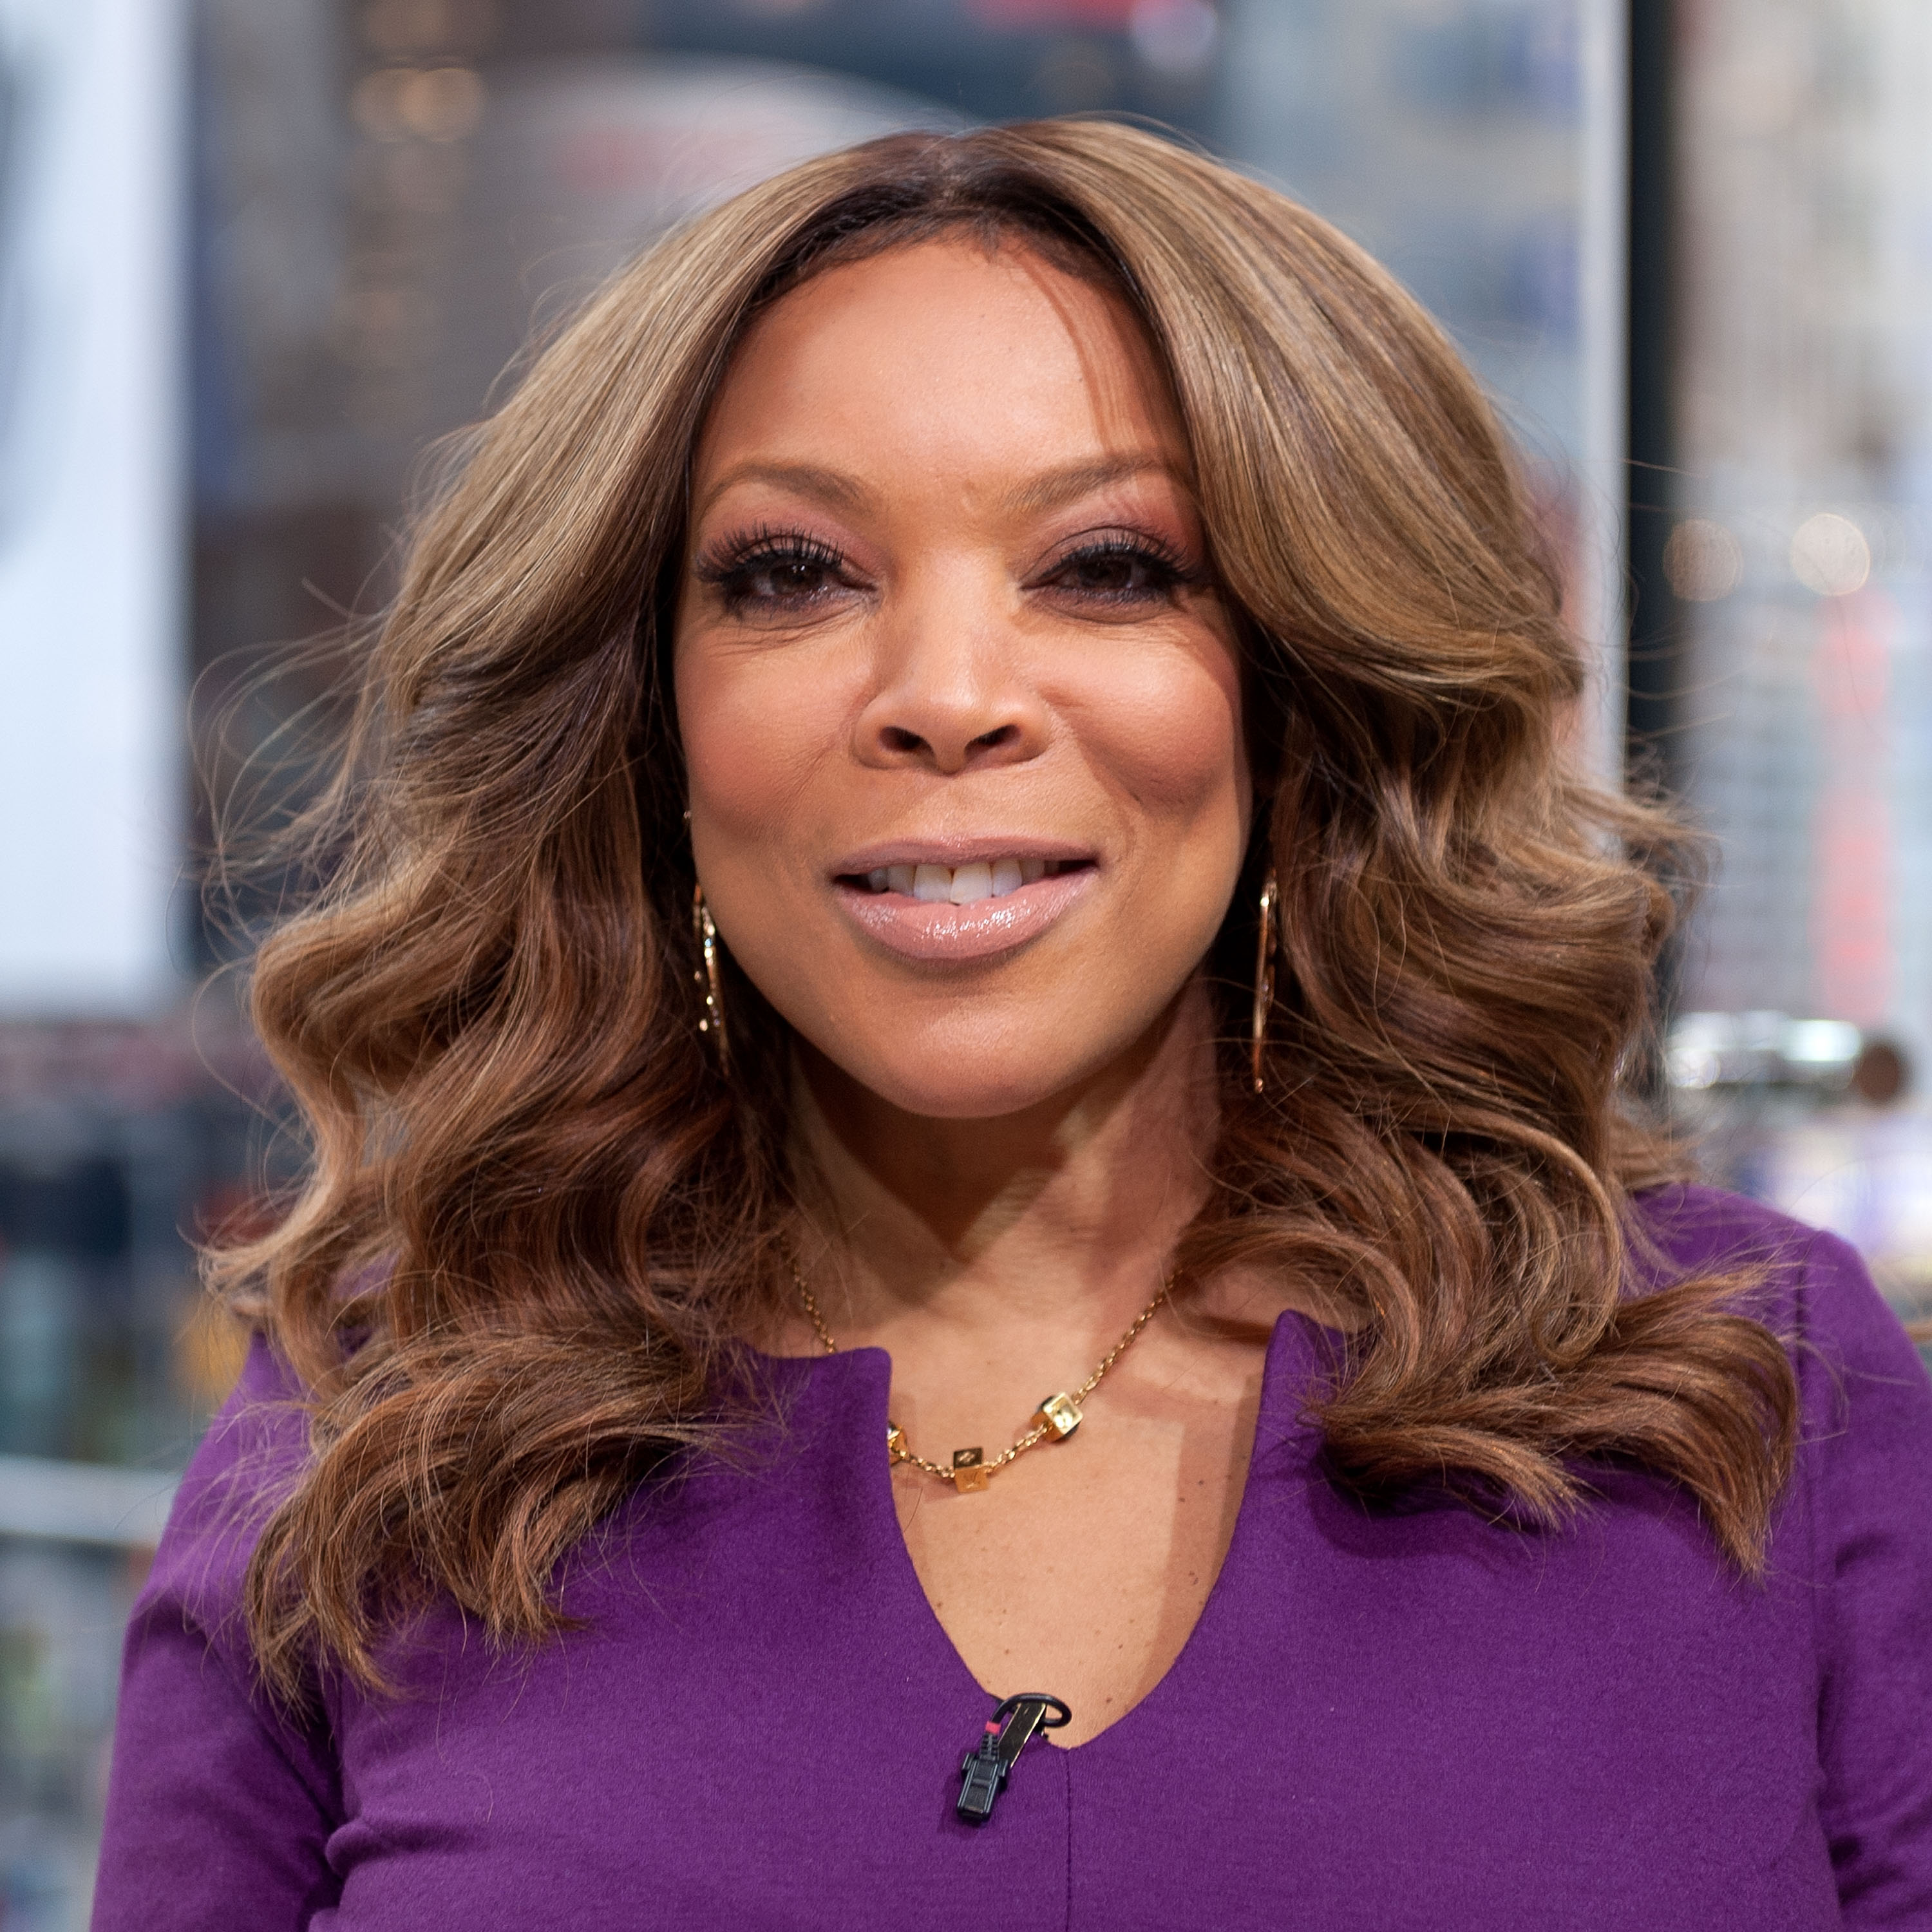 Outspoken host Wendy Williams at the studio of "Extra" in January 2015. | Photo: Getty Images